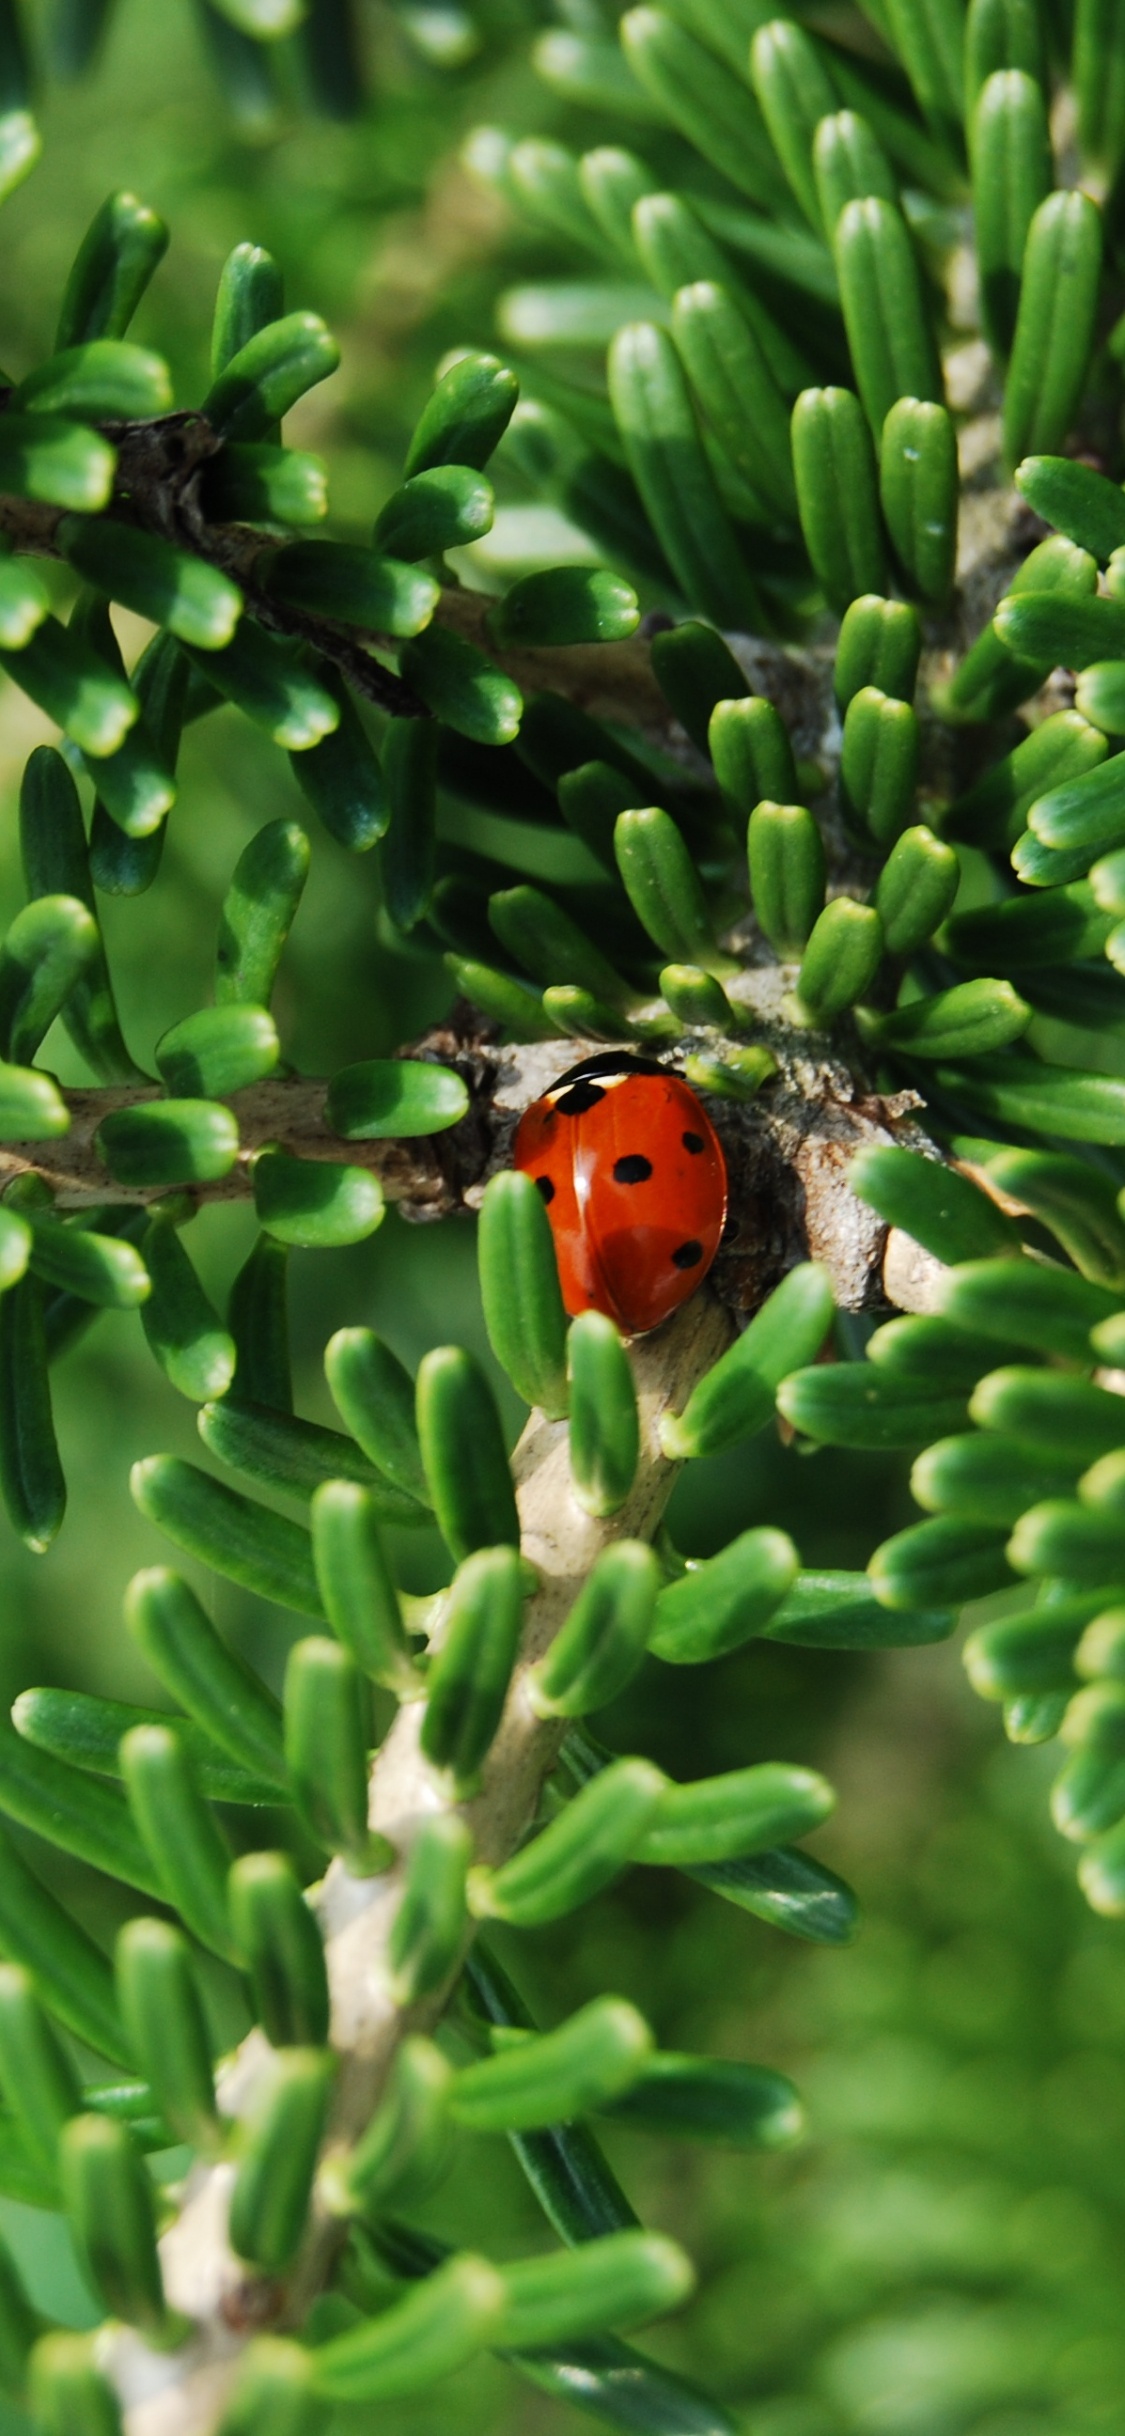 Red and Black Ladybug on Green Plant During Daytime. Wallpaper in 1125x2436 Resolution